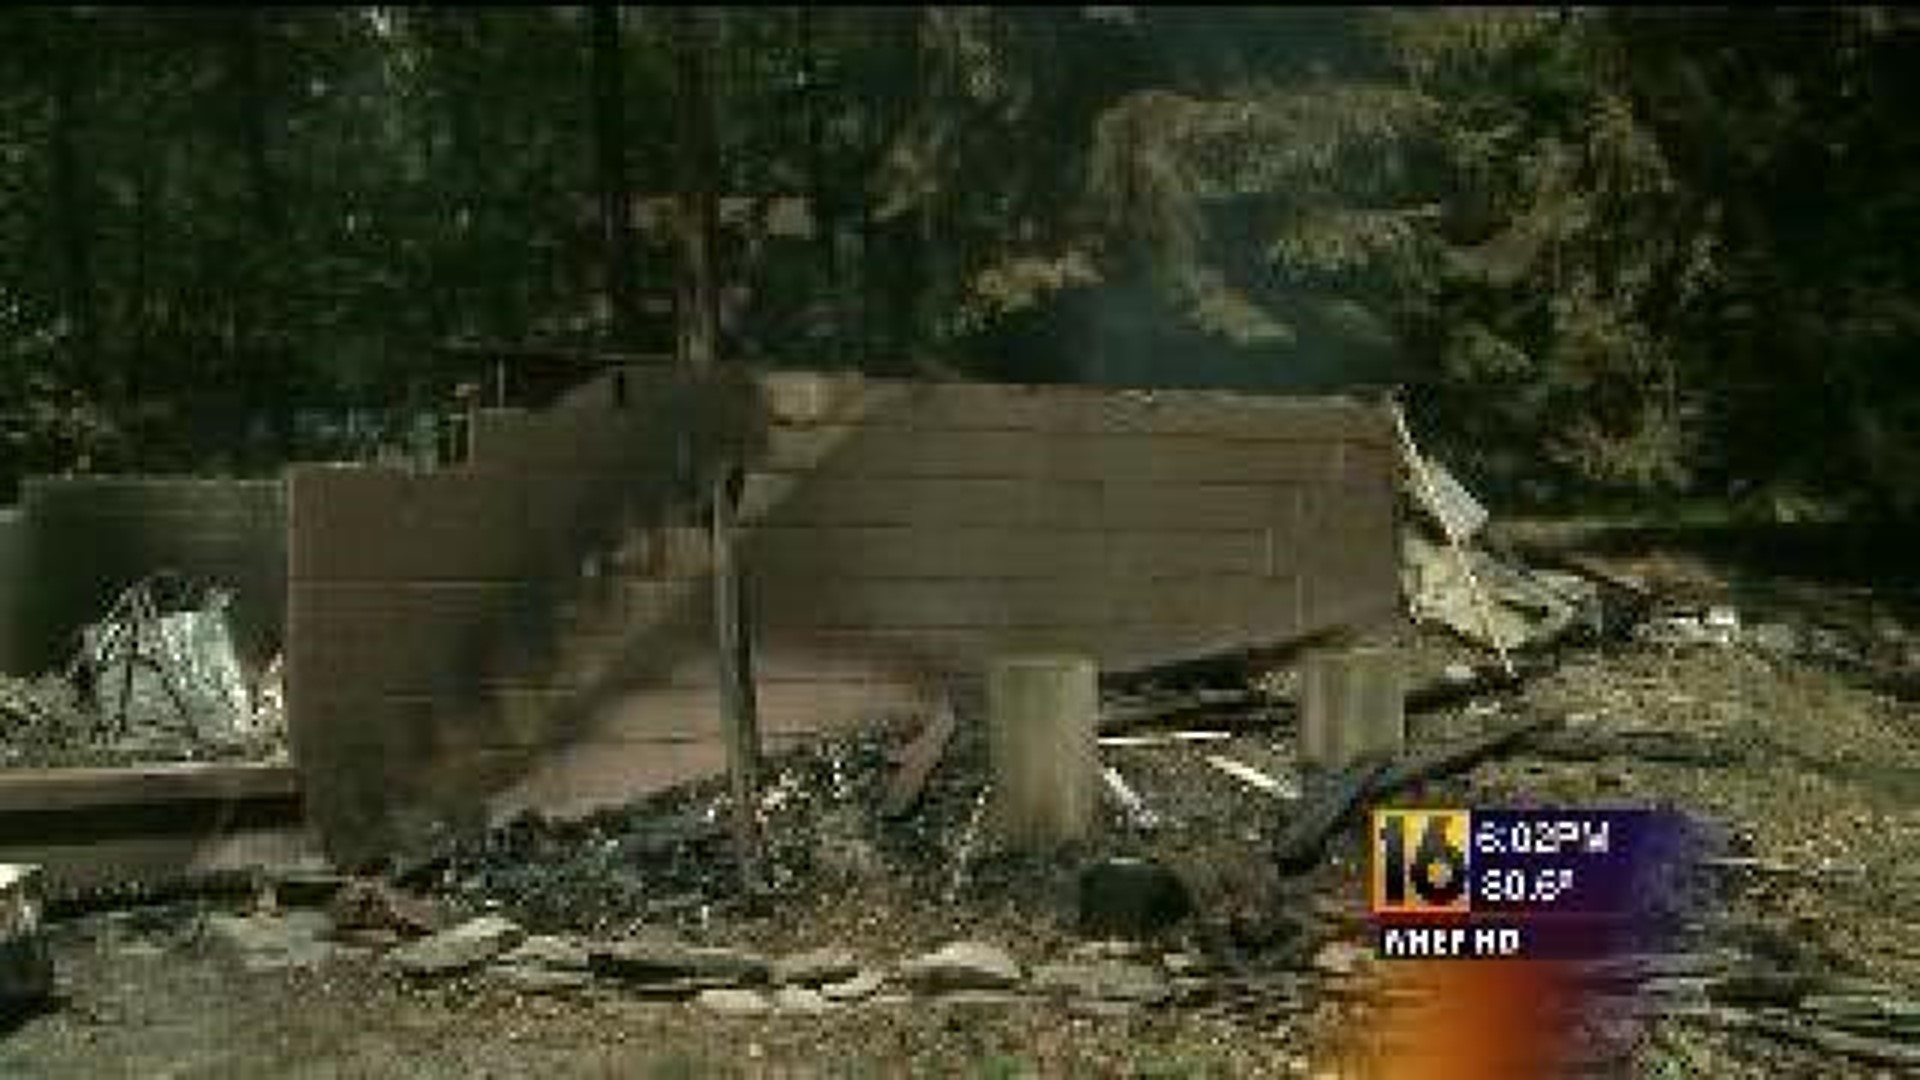 Storm Prevents Fire Company From Saving Home